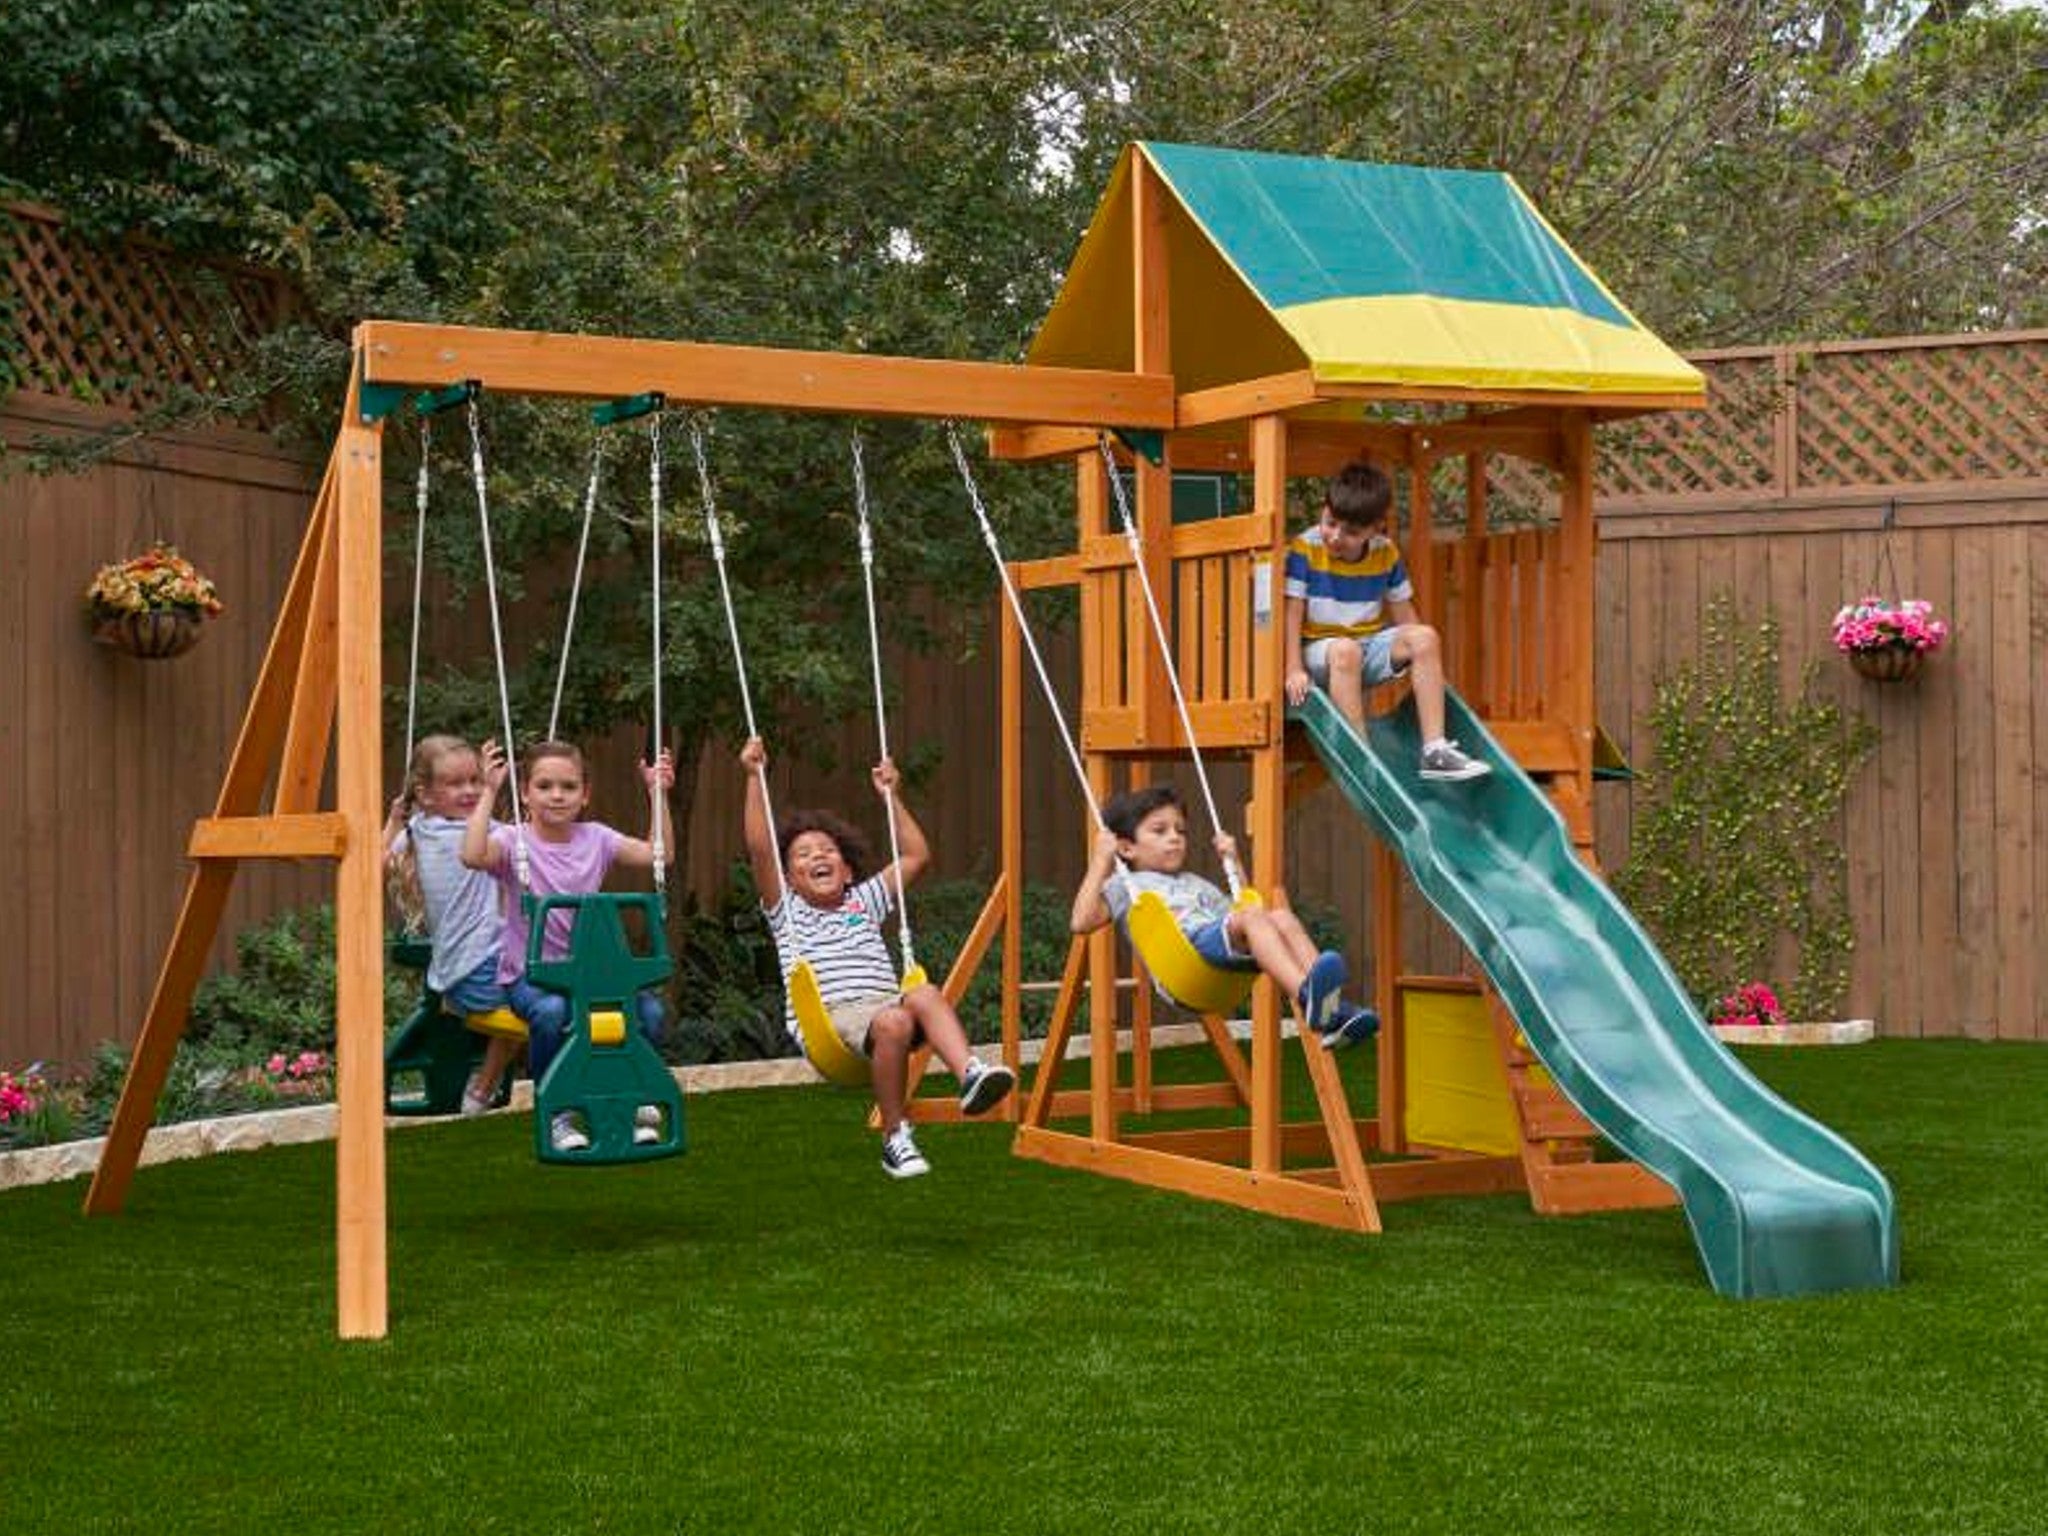 Climbing Ladder Fitness Toy Exercise Equipment Swingset Accessories Outdoor Climbing Rope Tree Swing Round Ball Children Game Play Set Play Grounds for Yards for Kids 